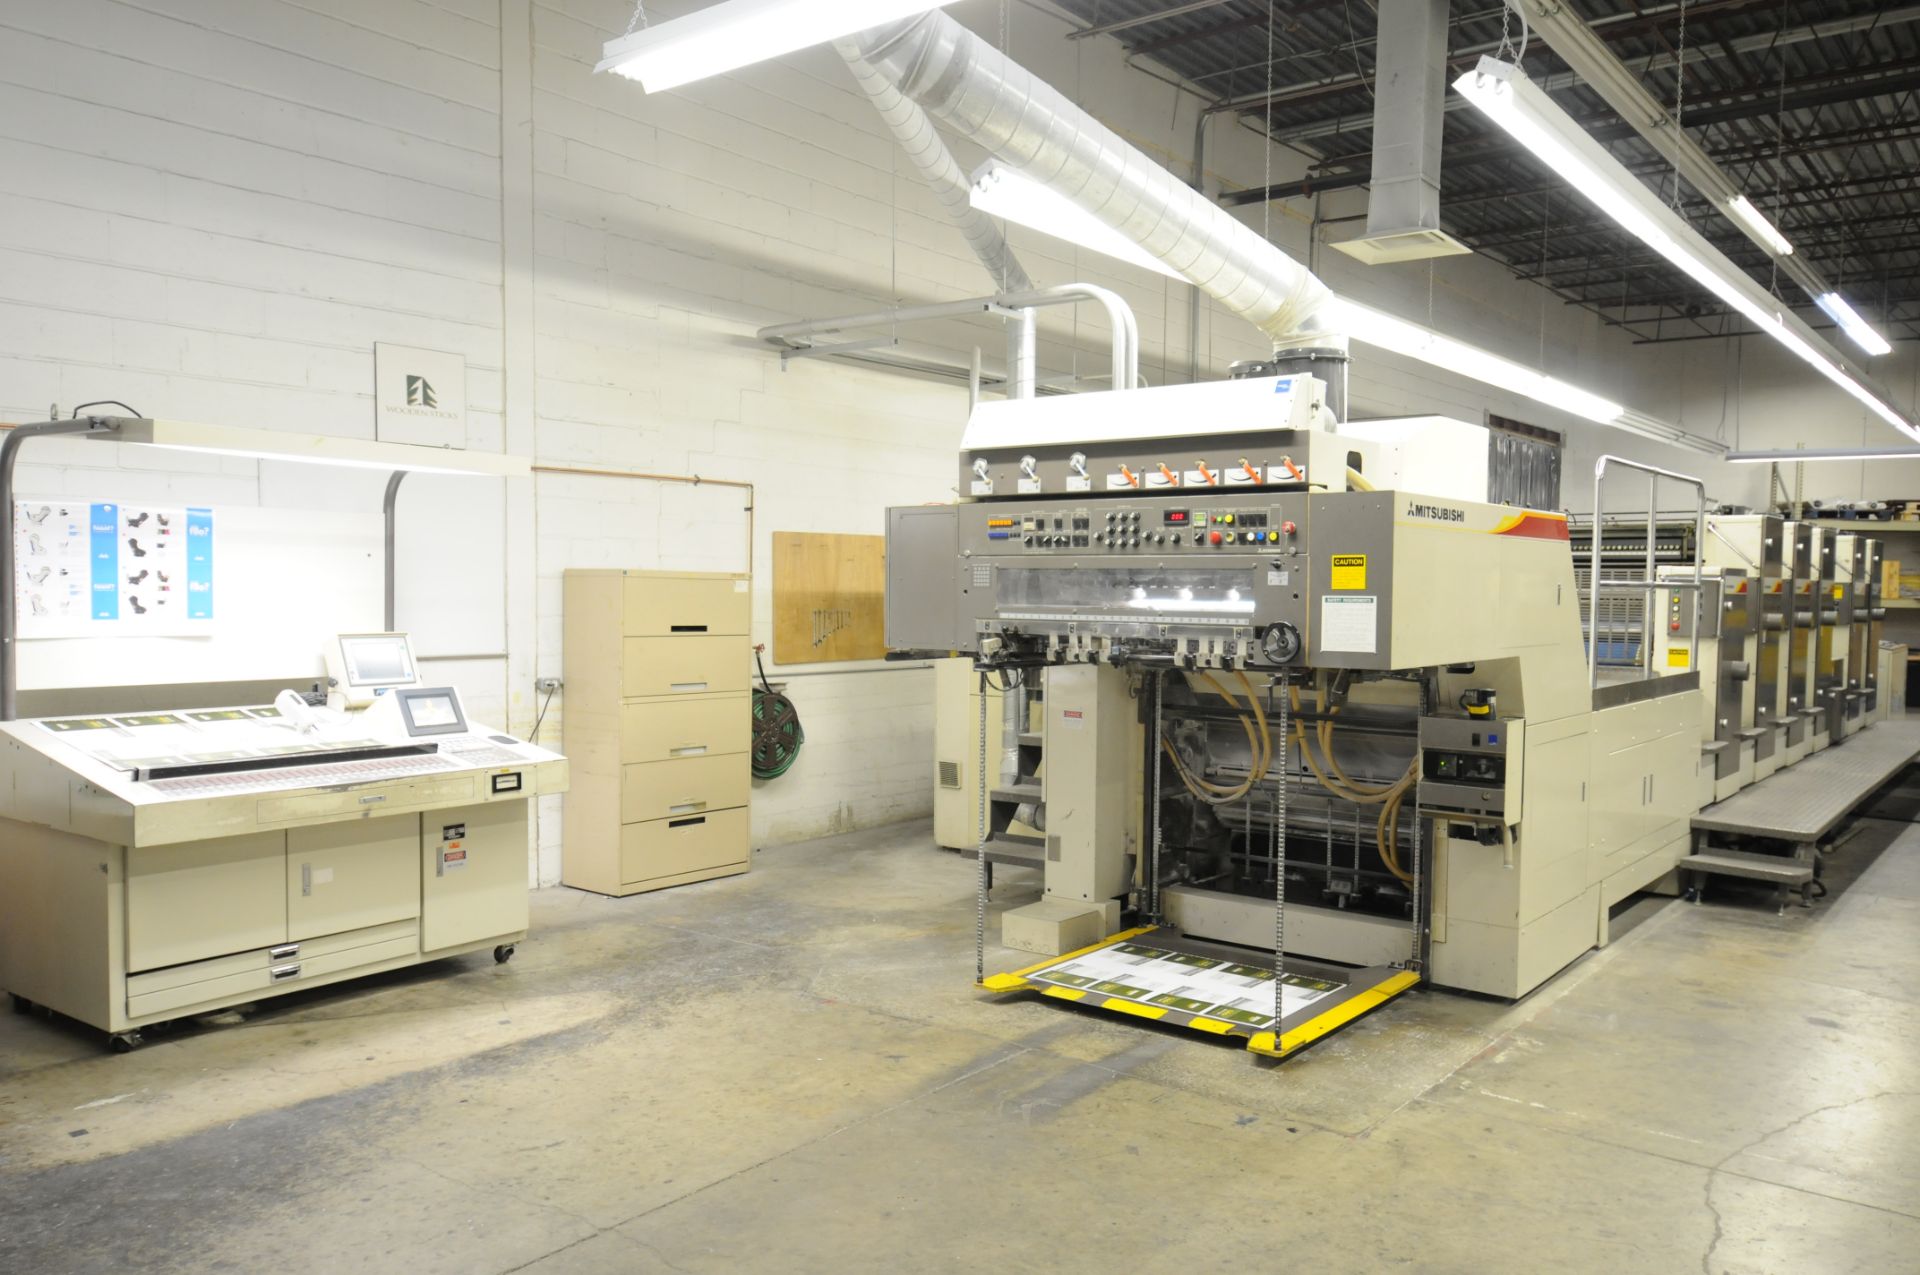 MITSUBISHI (2000) 3FR-5 (5) COLOR, 40"X28" SHEET-FEED OFFSET PERFECTOR PRESS WITH FULLY INTEGRATED - Image 4 of 13